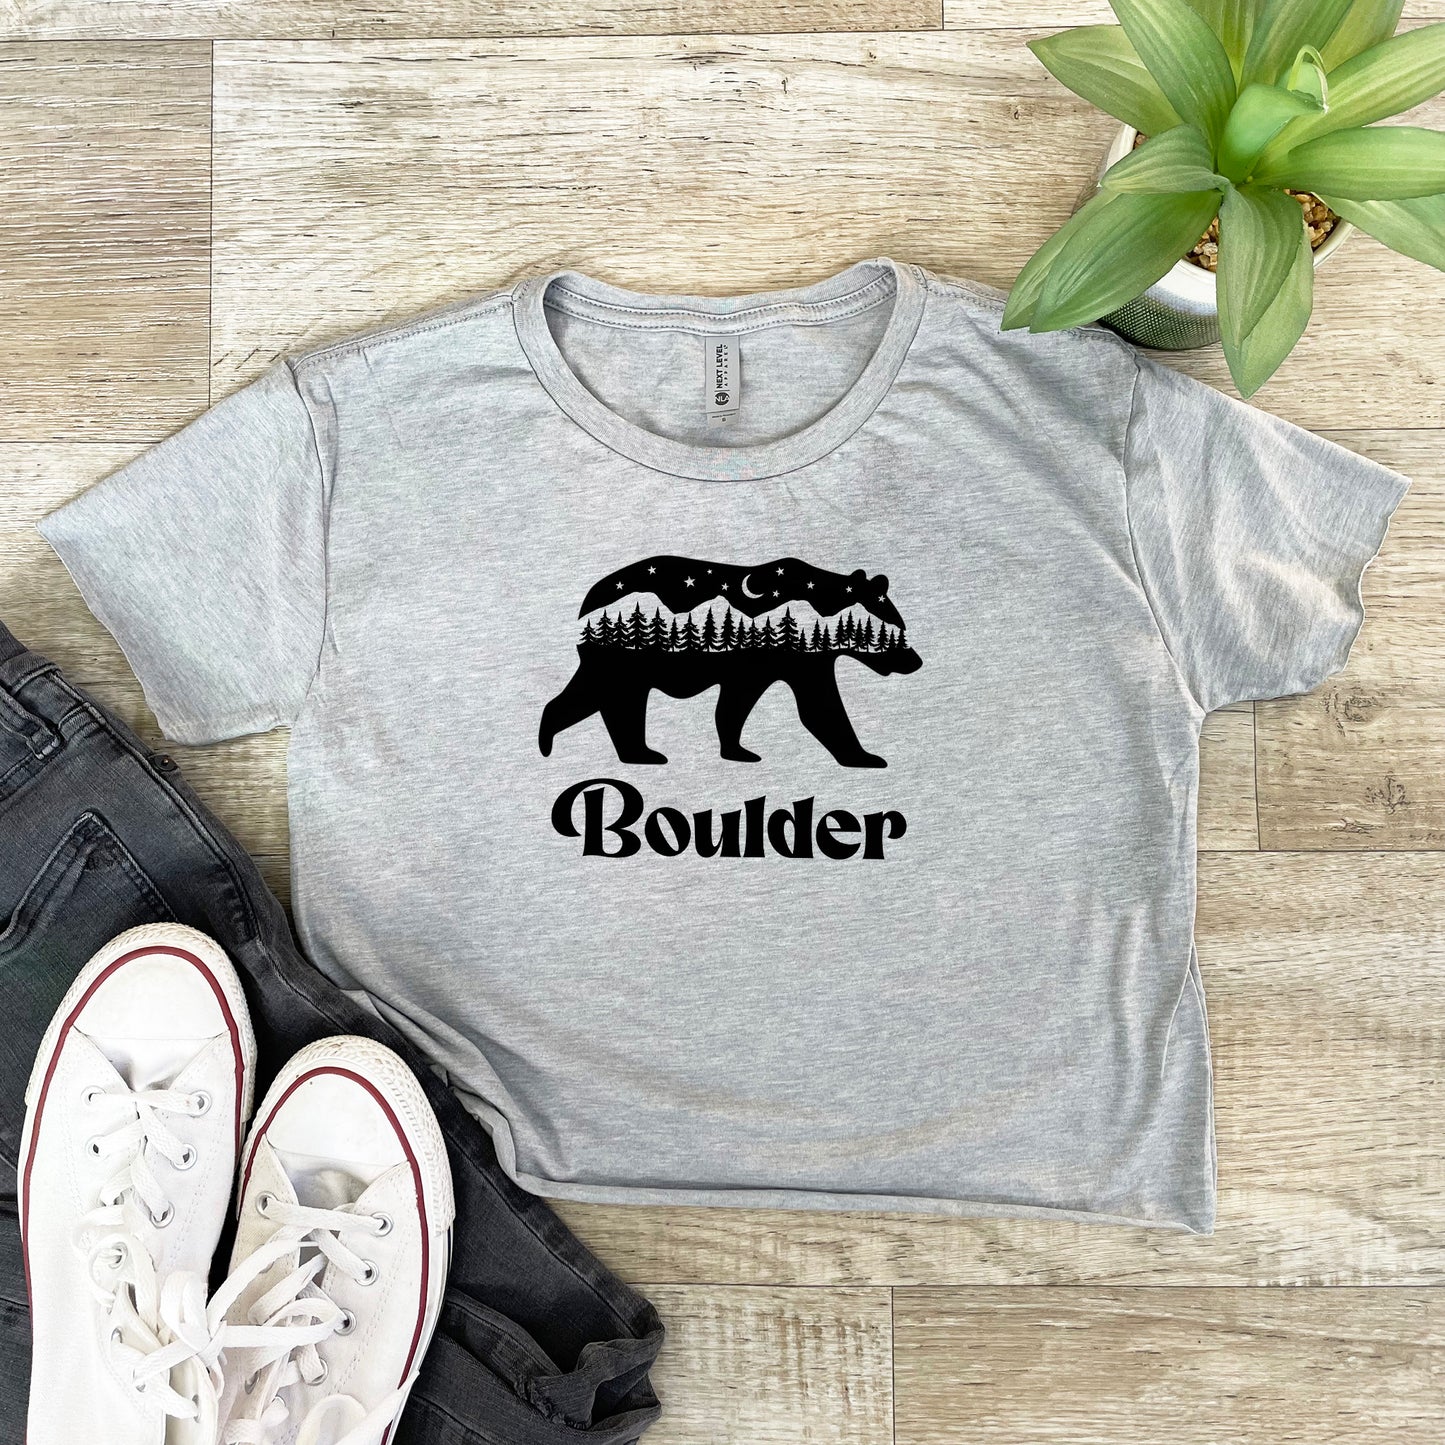 a t - shirt that says boulder with a bear on it